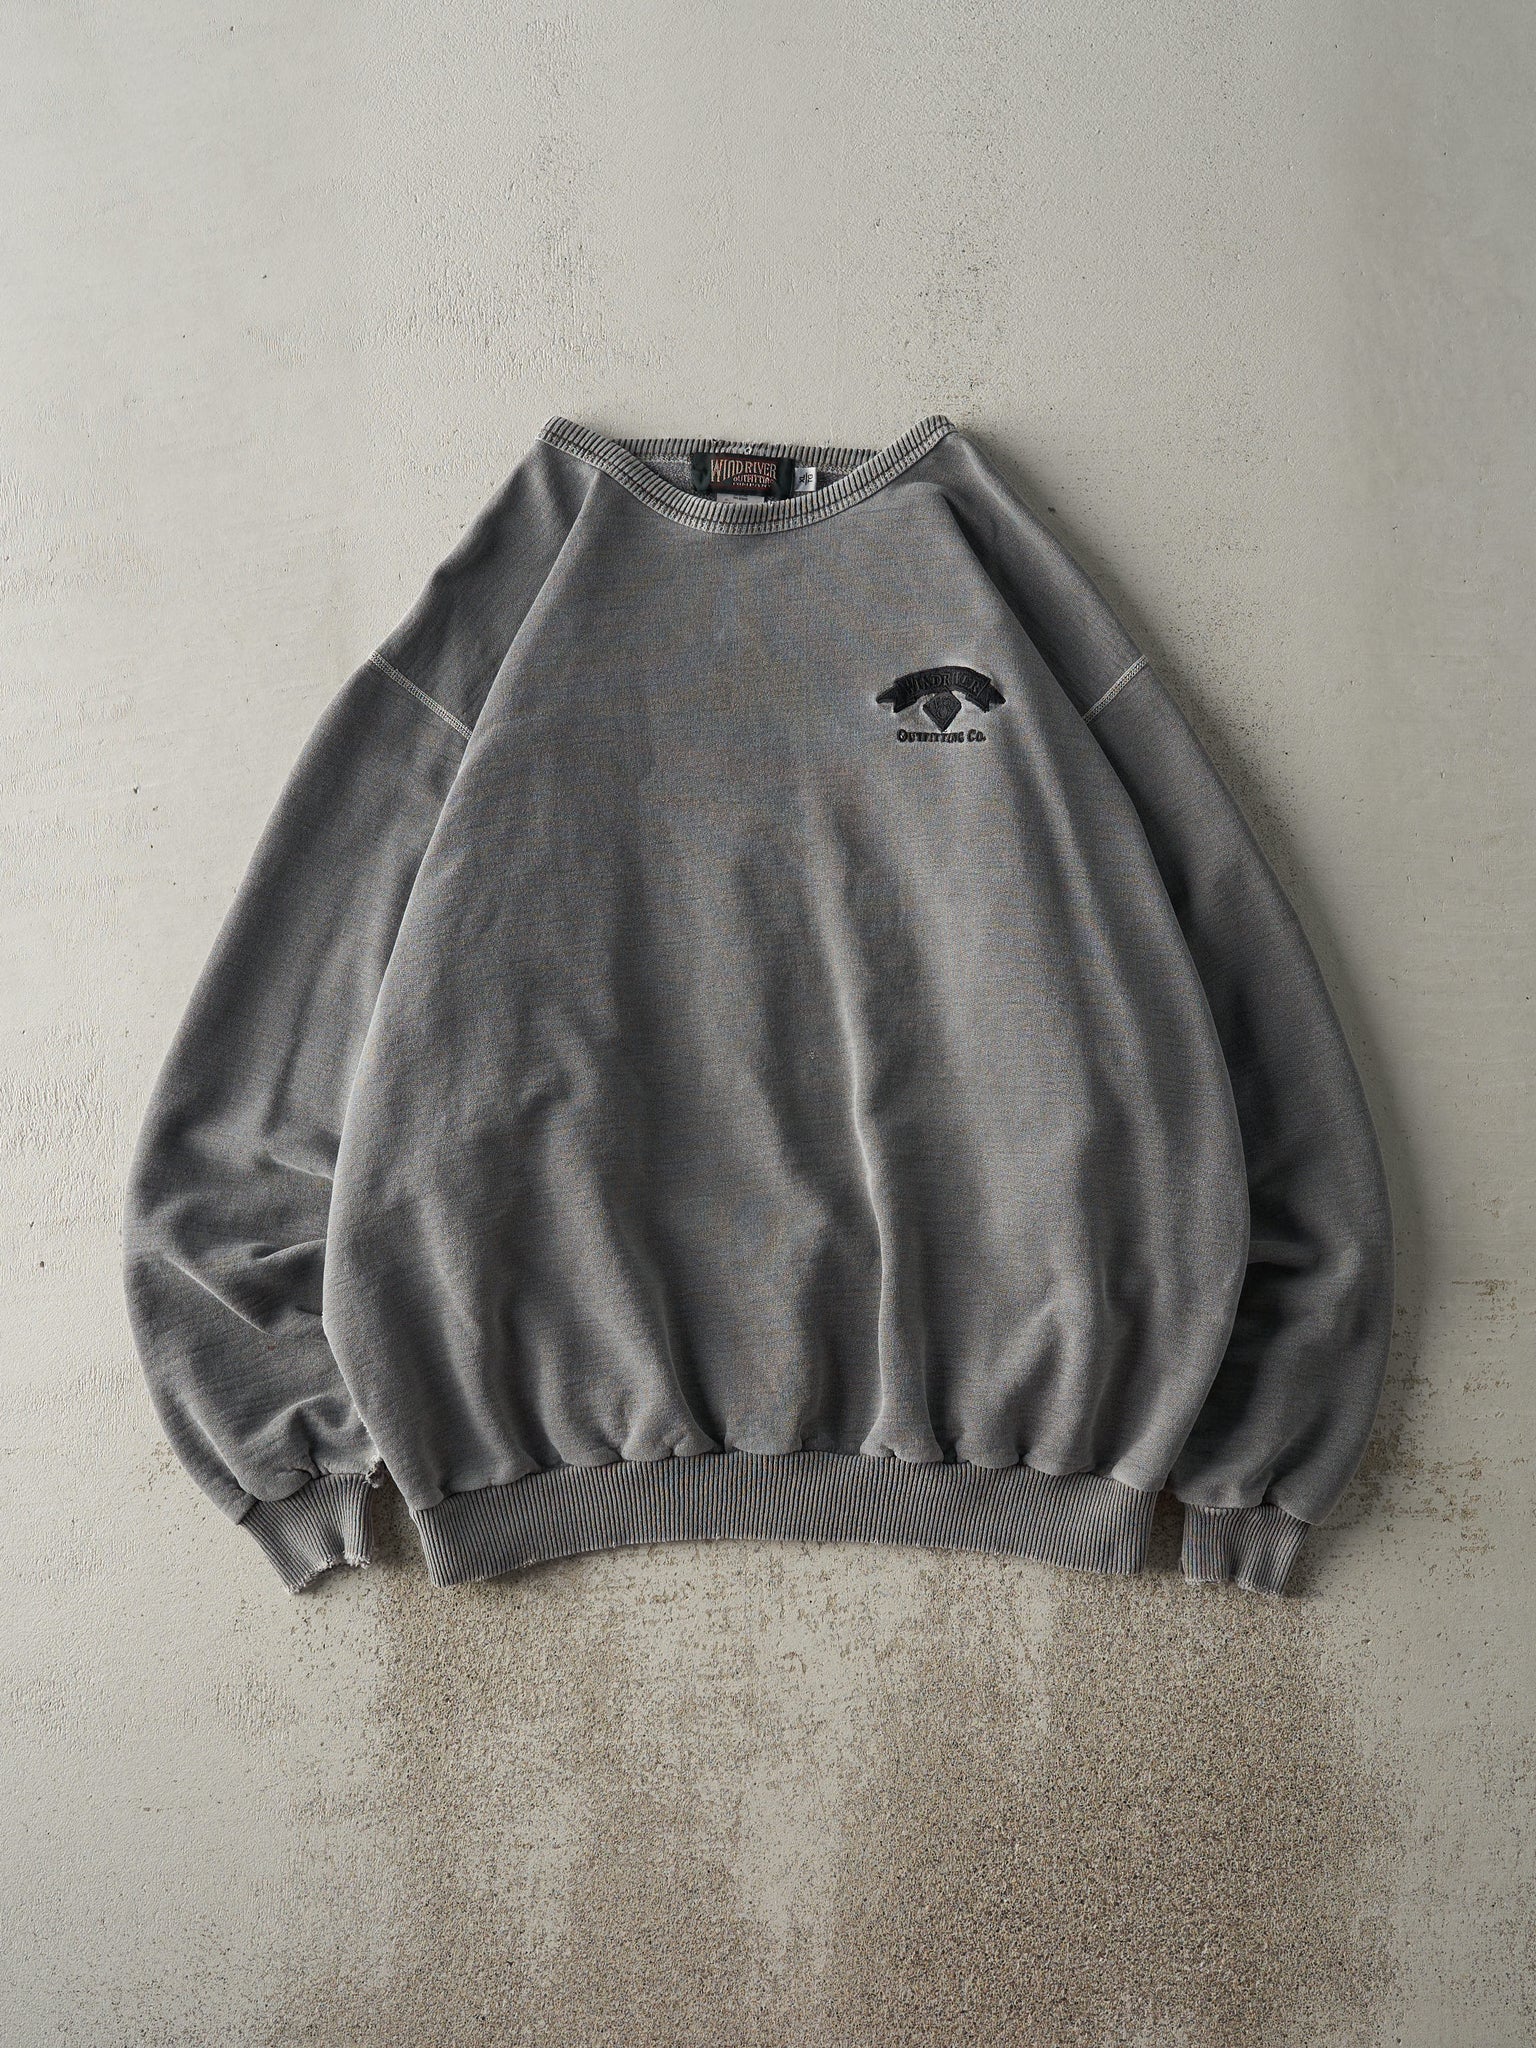 Vintage 90s Faded Charcoal Grey Embroidered Wind River Crewneck (XL)